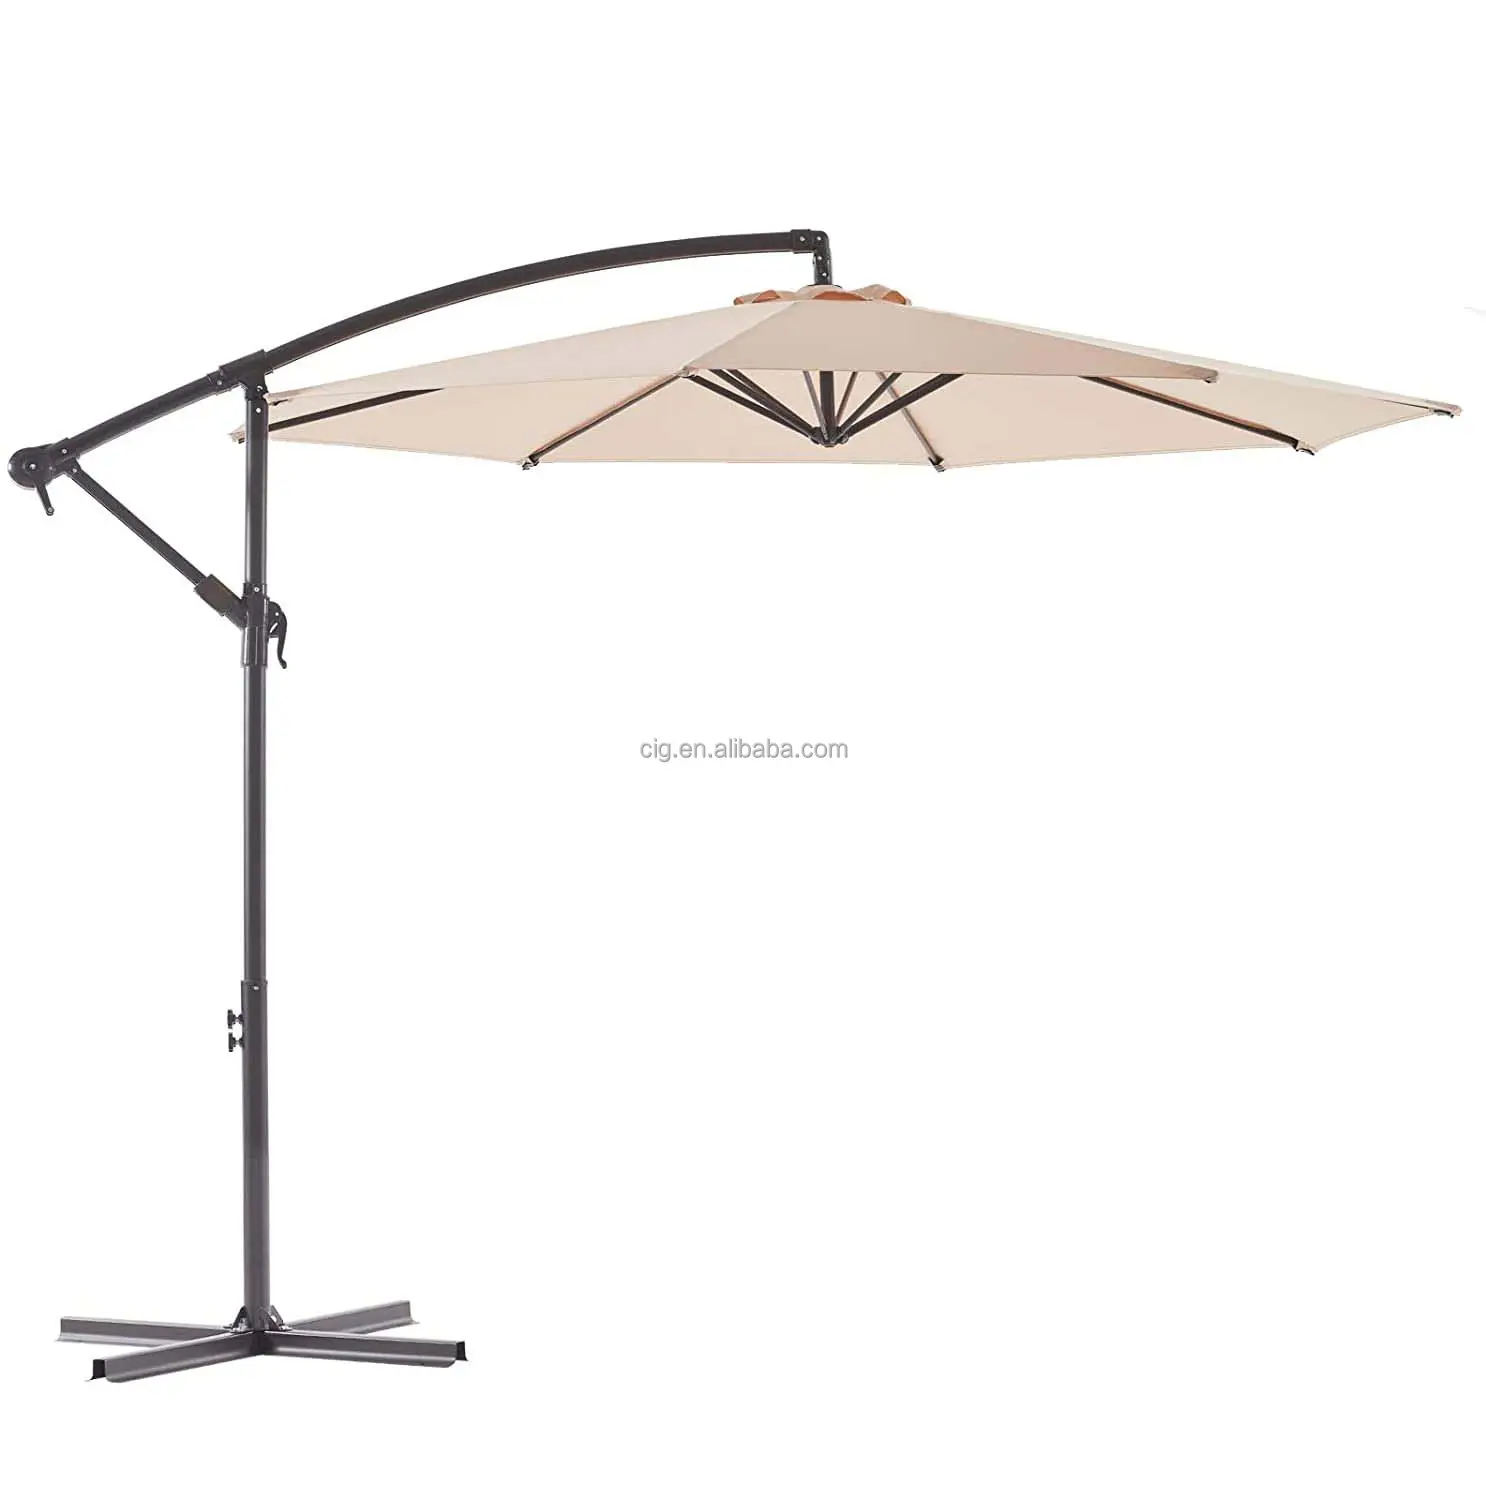 Factory PRICE 3m 8 ribs or 6 ribs luxury foldable patio umbrella and outdoor cantilever parasol